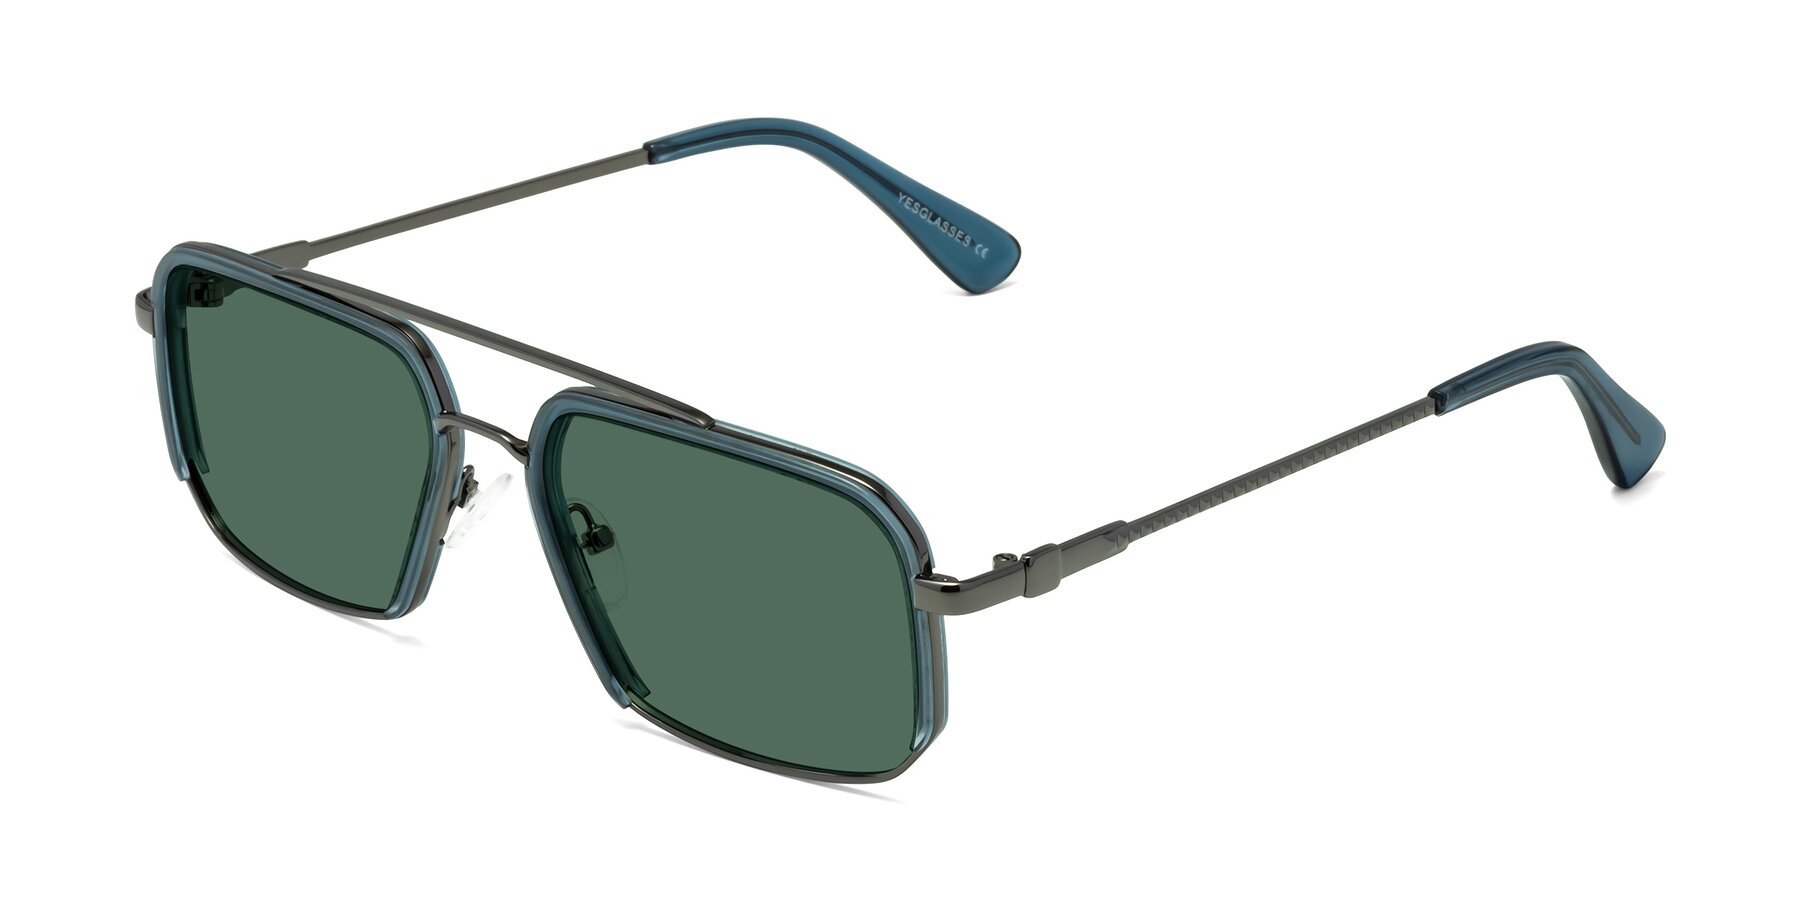 Angle of Dechter in Teal-Gunmetal with Green Polarized Lenses